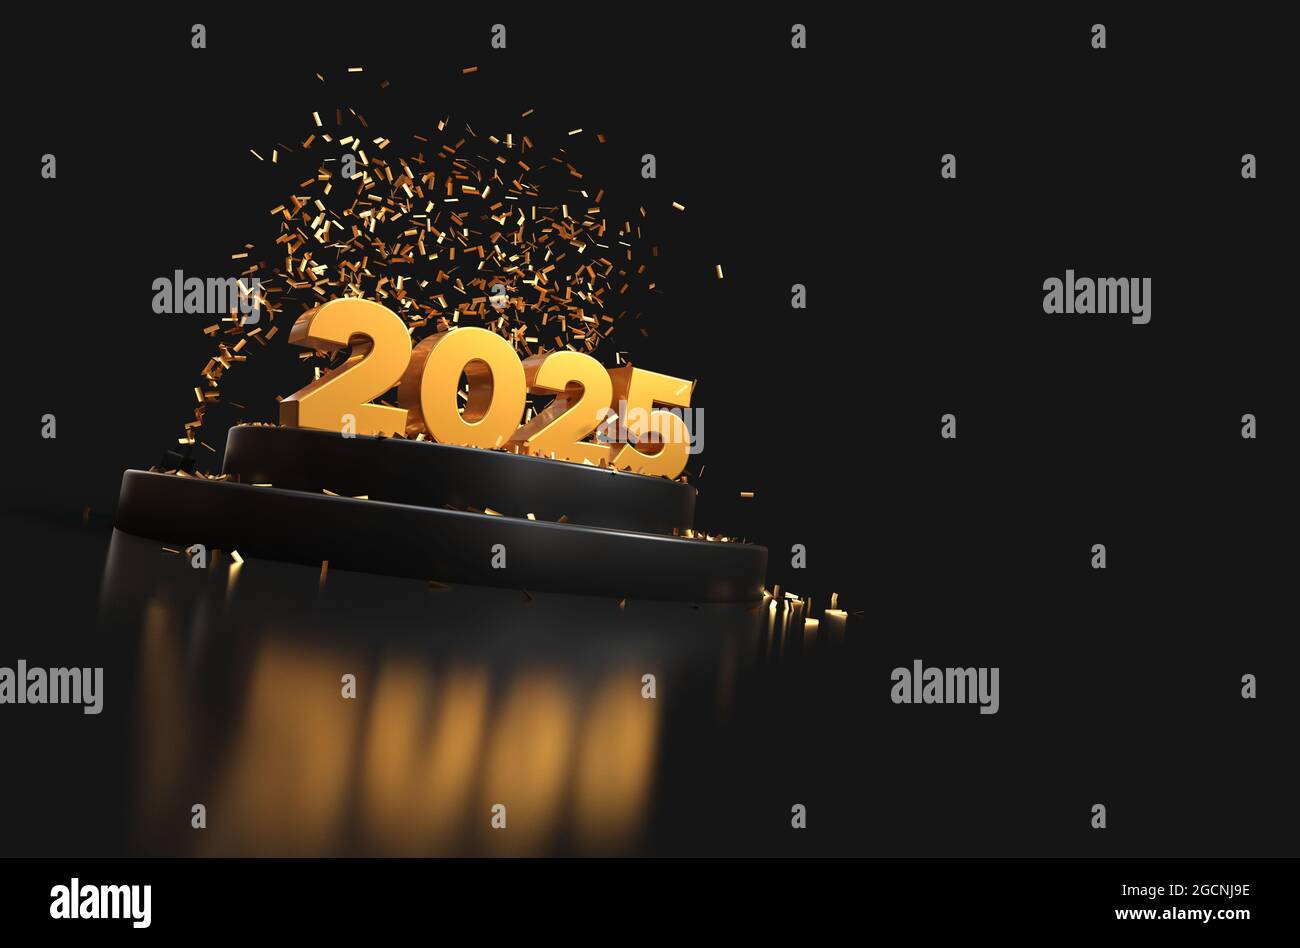 happy new year 2025 - 3D rendering - gold and black colors Stock Photo